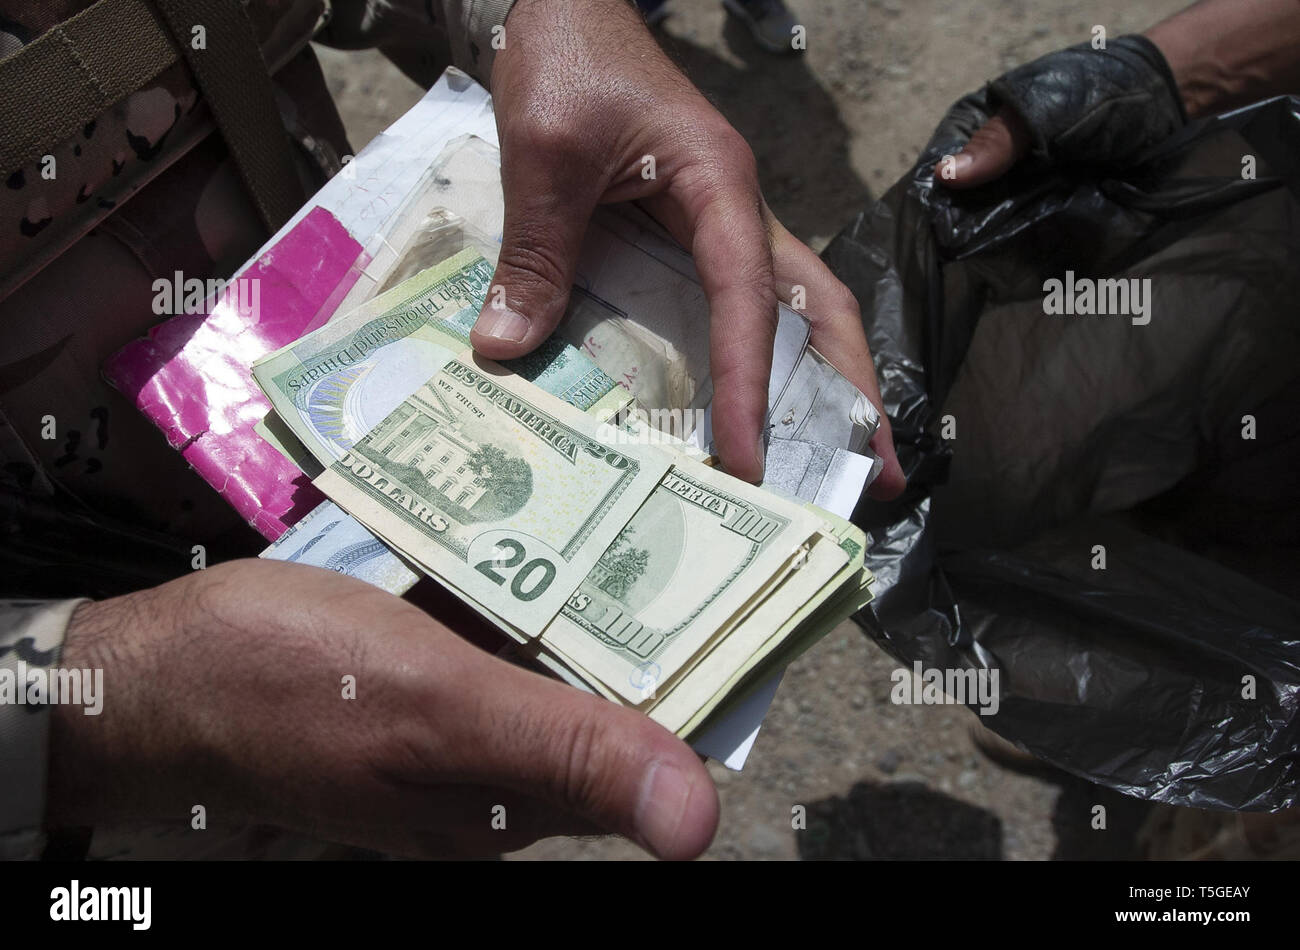 May 2, 2006 - Bayji, Salah ad Din, Iraq - An Iraqi army officer holds up moeny found on a man suspected of selling black market fuel at a truck stop just outside Bayji, Iraq May 2, 2006.Soldiers from the Iraqi army's 4th Battalion, 2nd Brigade, 4th Division, and the American's Abu Company, 1st Battalion, 187th Infantry Regiment have been cracking down on blackmarket fuel smugglers and sellers around the area of Bayji, Iraq. The insurgency and criminal gangs gain a lot of their funding from the smuggling of gas and oil to Turkey, Syria and Jordan, said officials with the 101st Airborne Divi Stock Photo